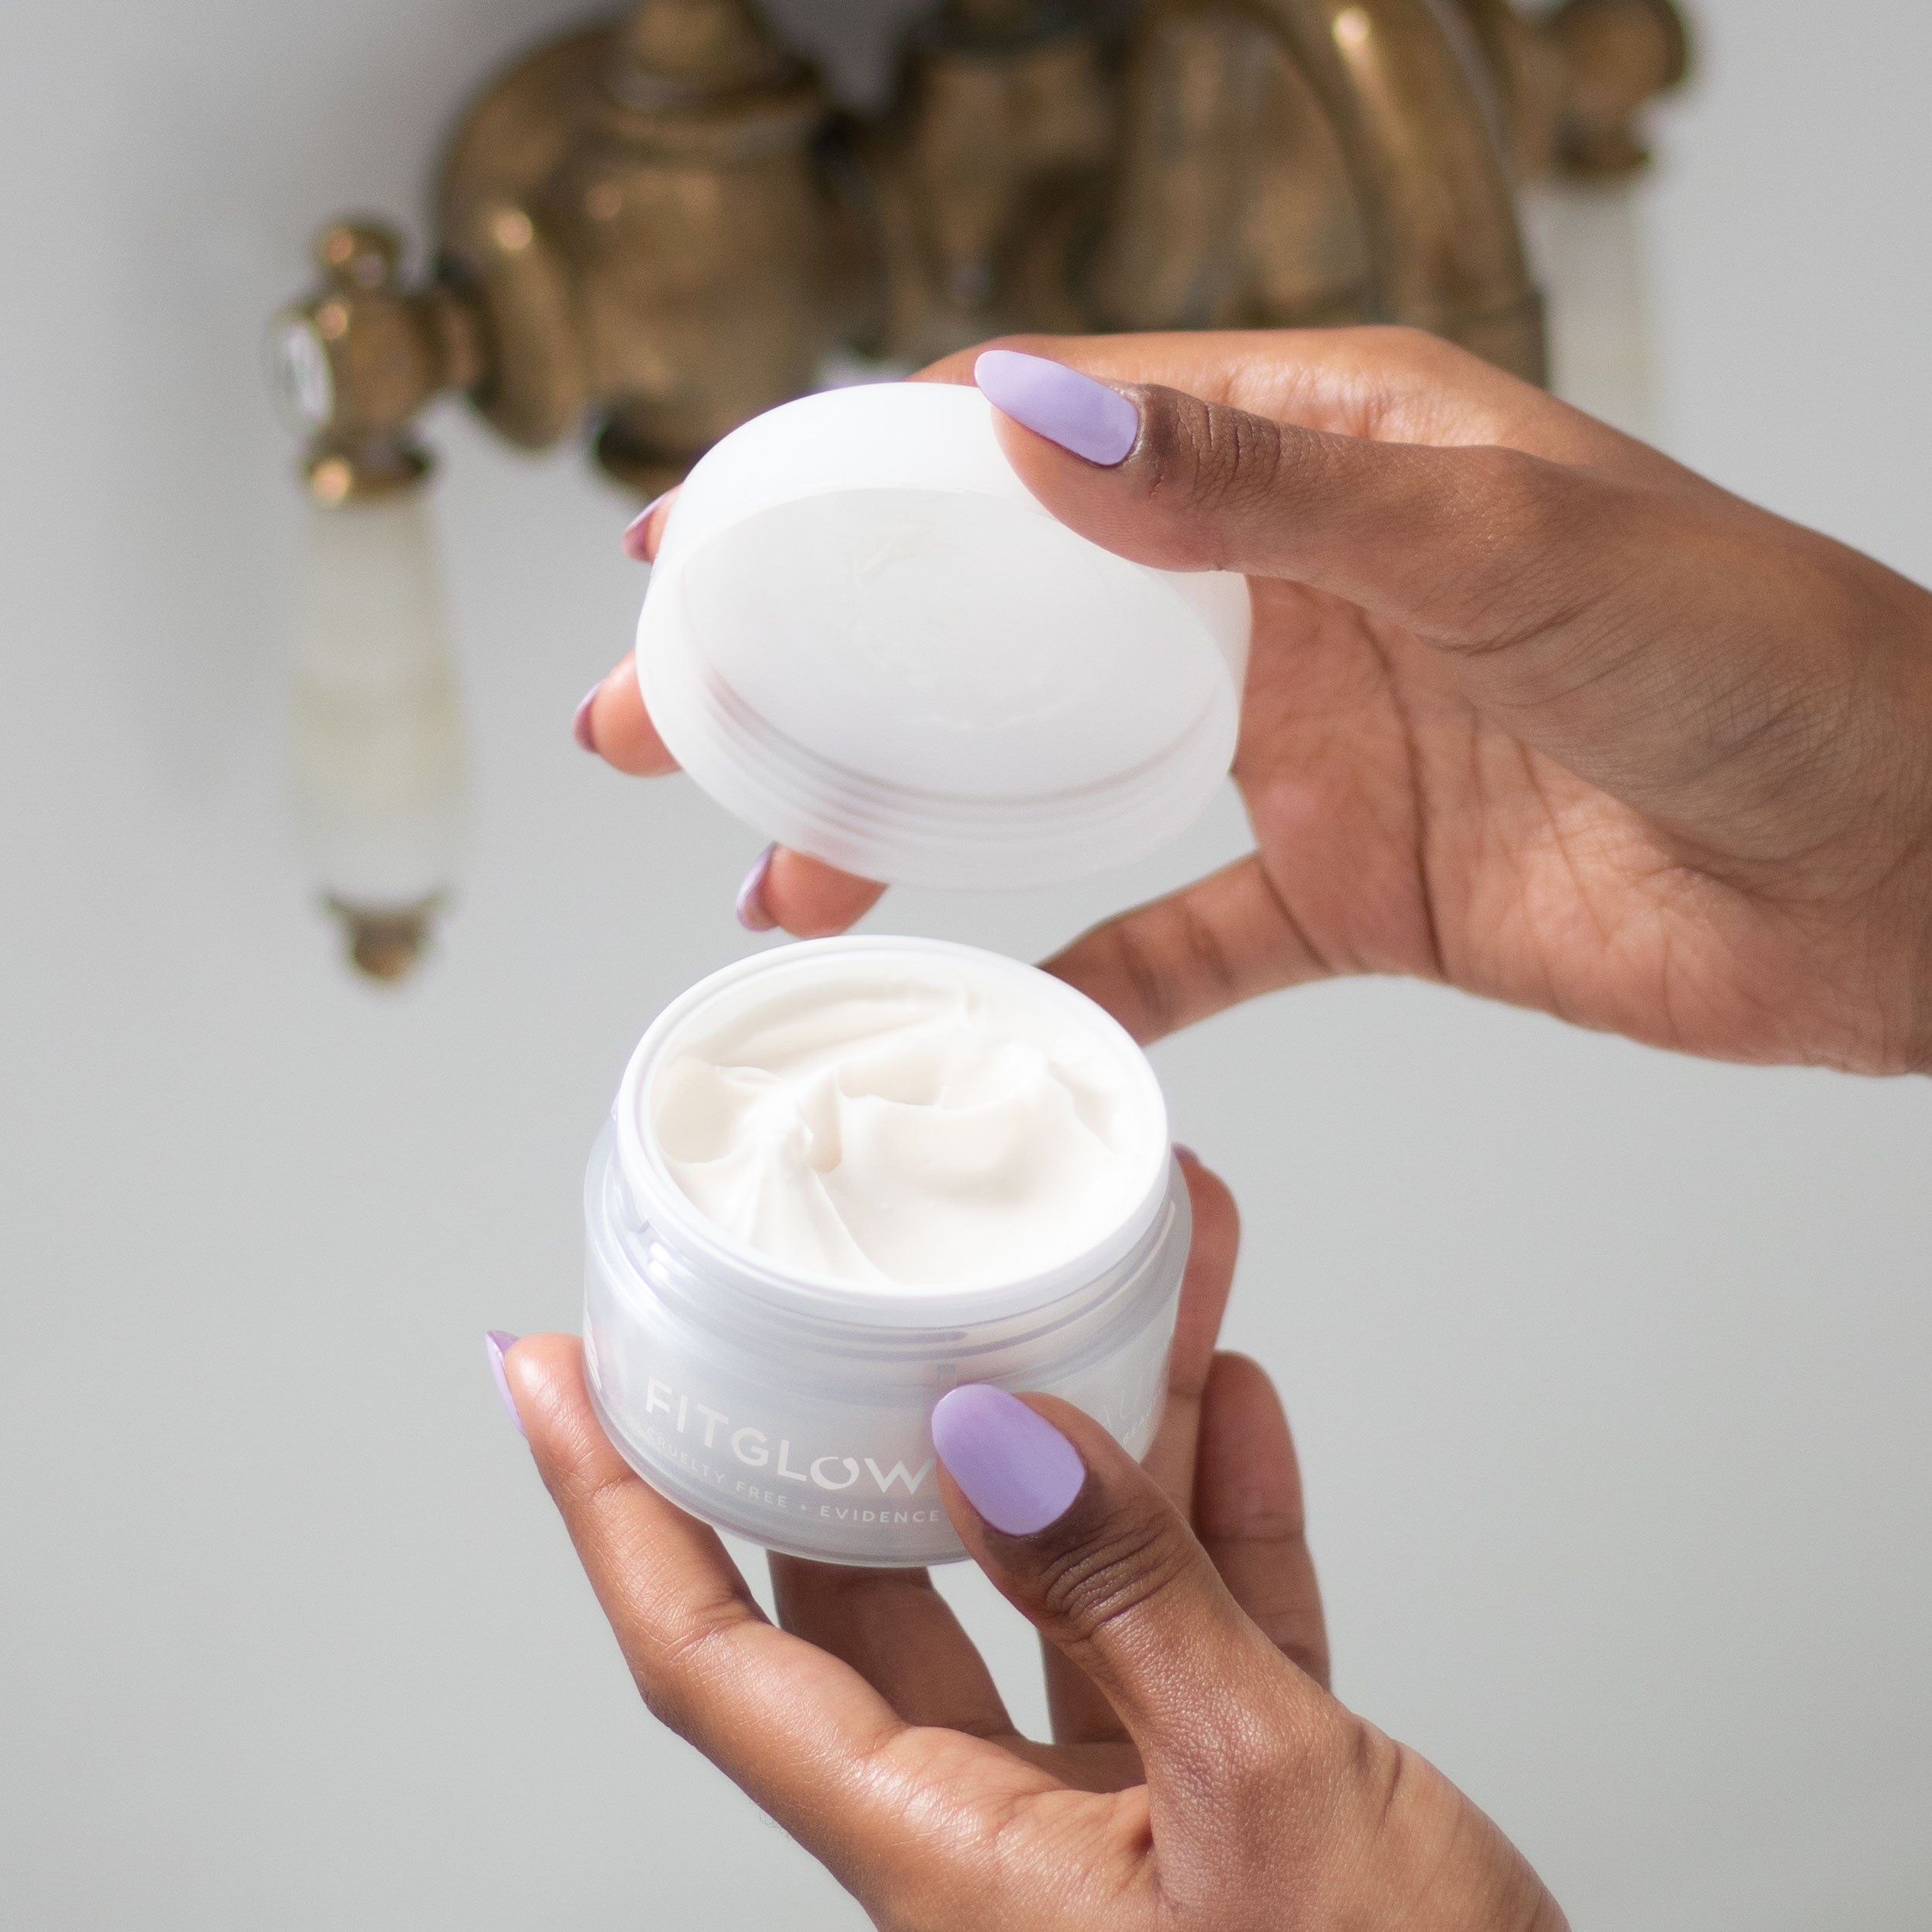 Fitglow Beauty Cloud Ceramide Balm at Socialite Beauty Canada